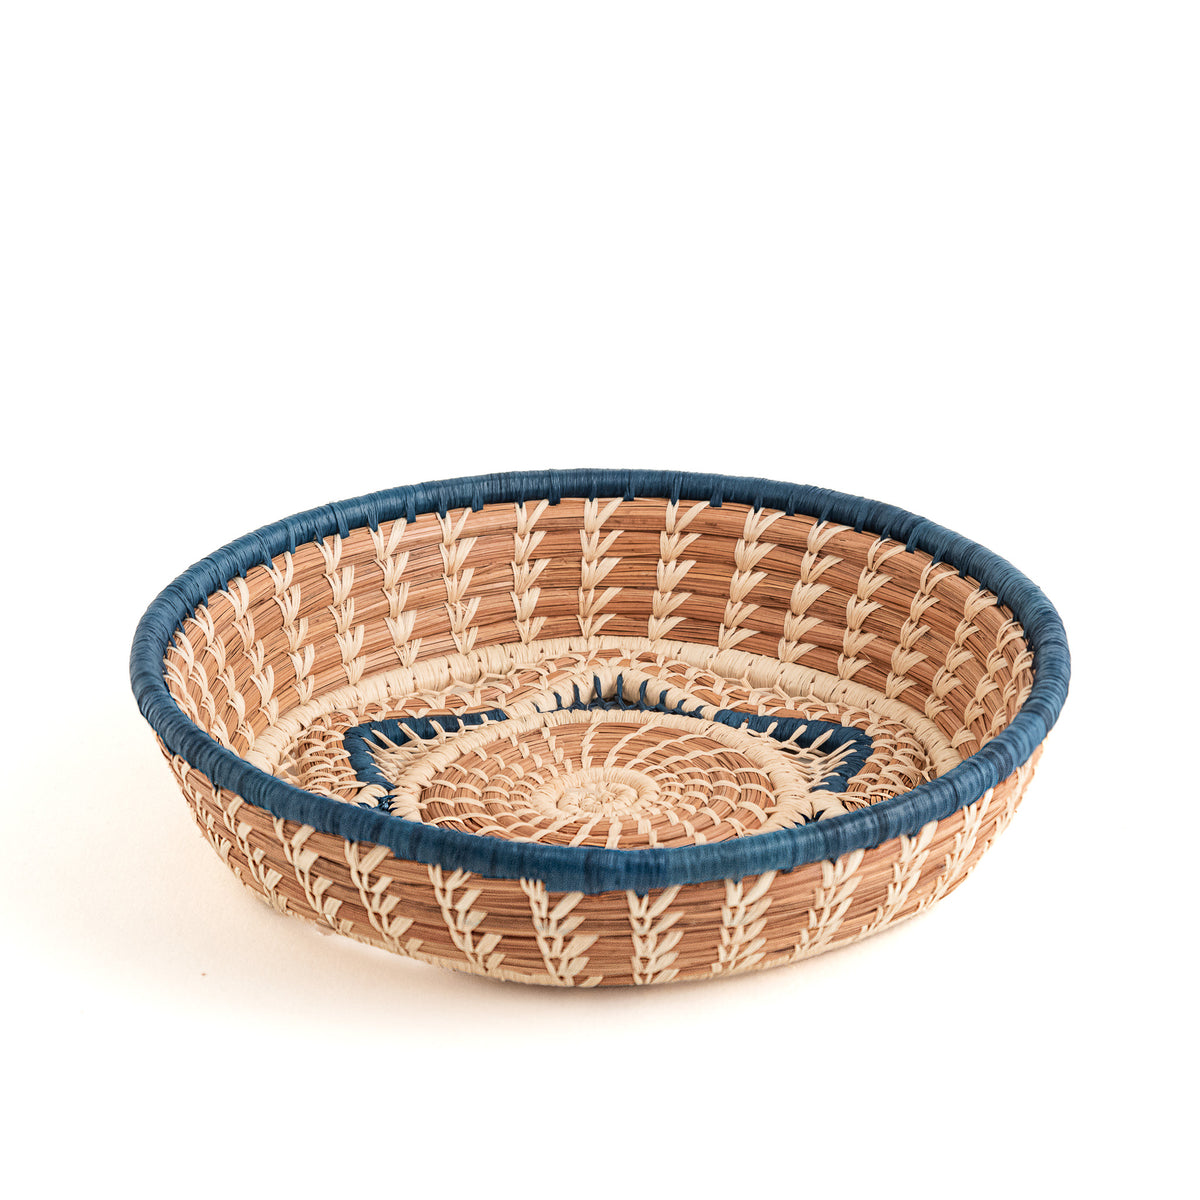 pine needle basket with star center and blue trim side